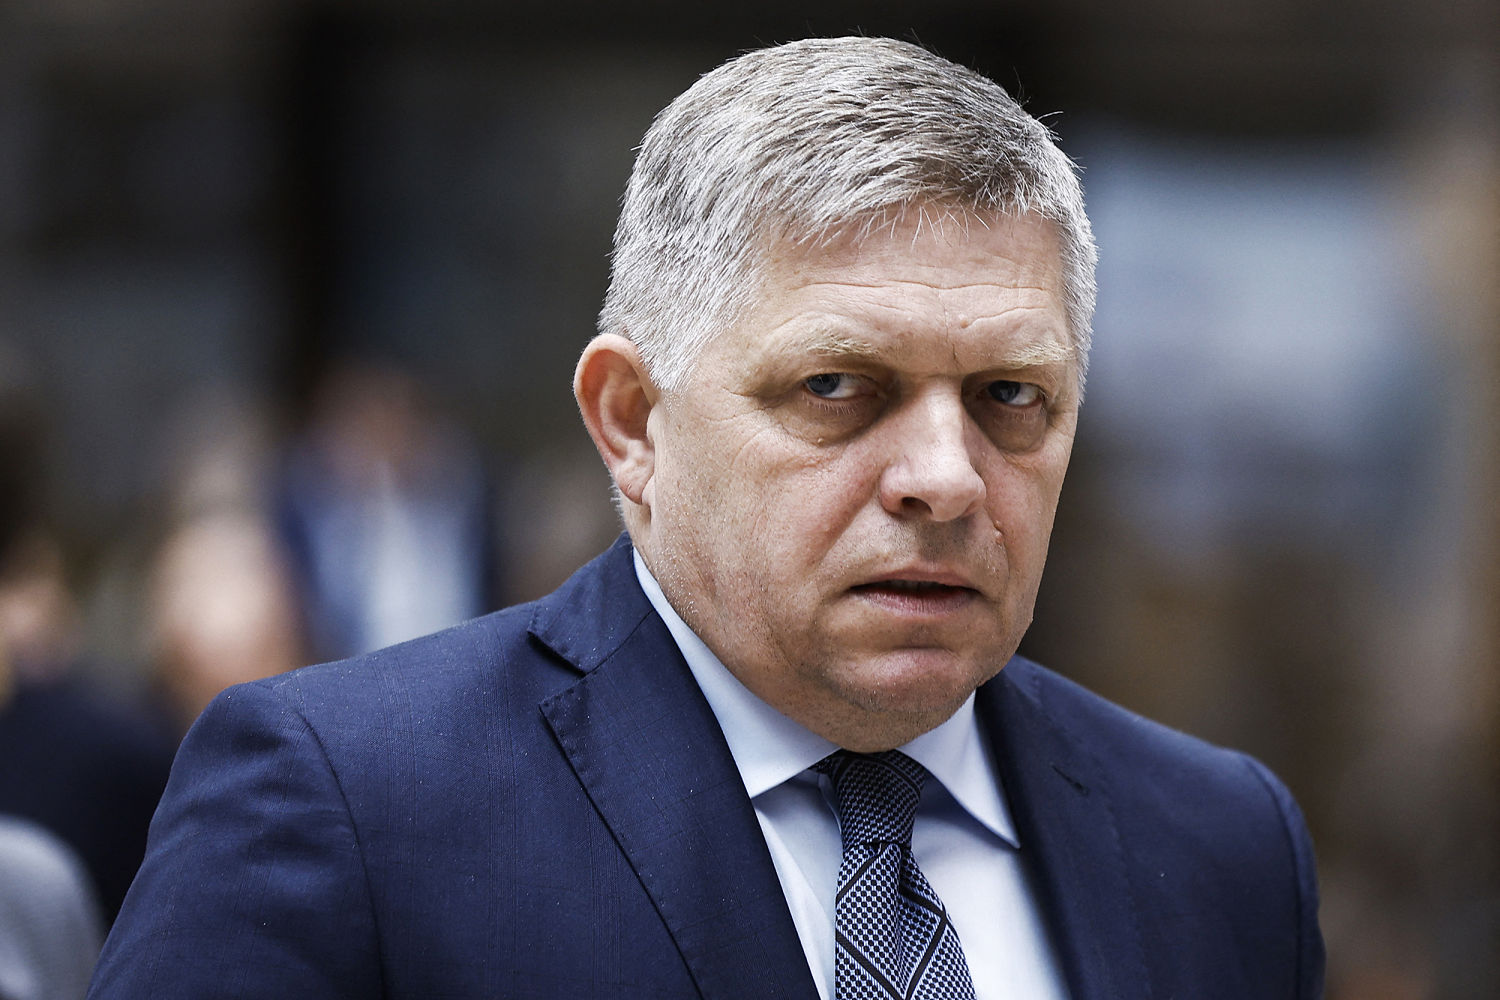 Slovak PM still in serious condition after shooting as suspect appears in court